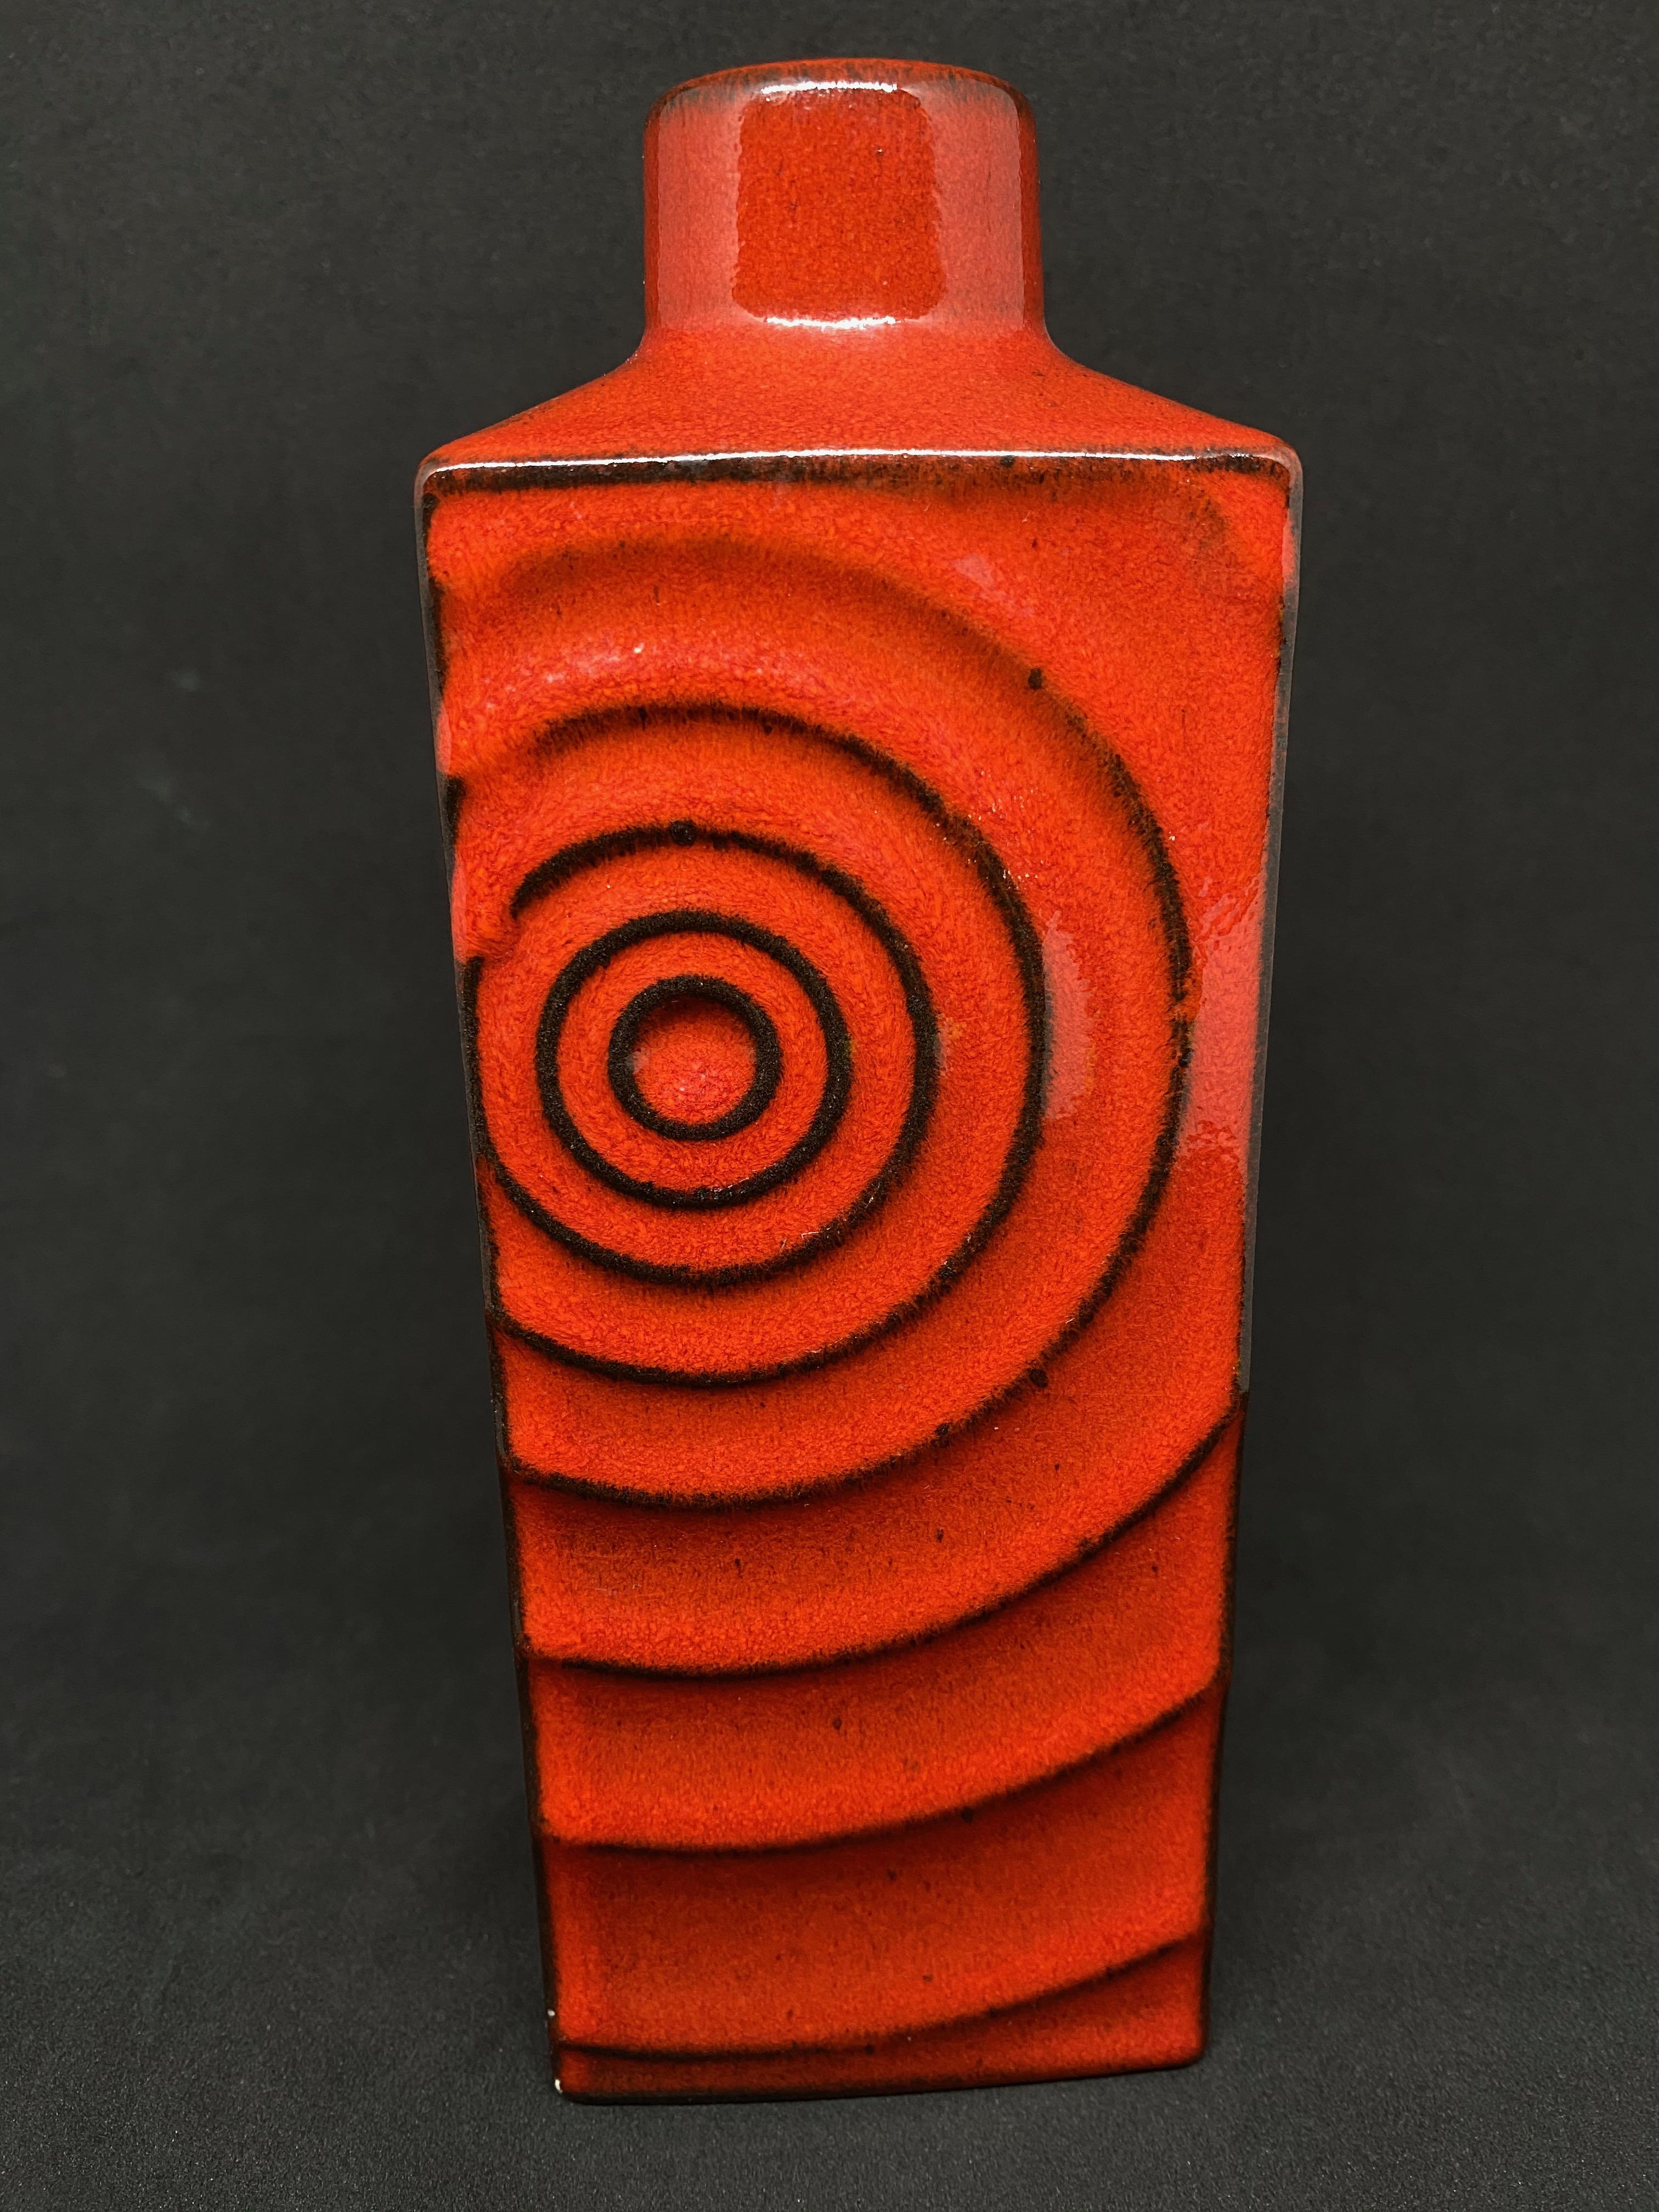 An amazing midcentury studio art pottery vase made in Germany, circa 1970s, by Steuler Keramik. Designer Cari Zalloni. Vase is in very good condition with no chips, cracks, or flea bites. Signed with makers mark.